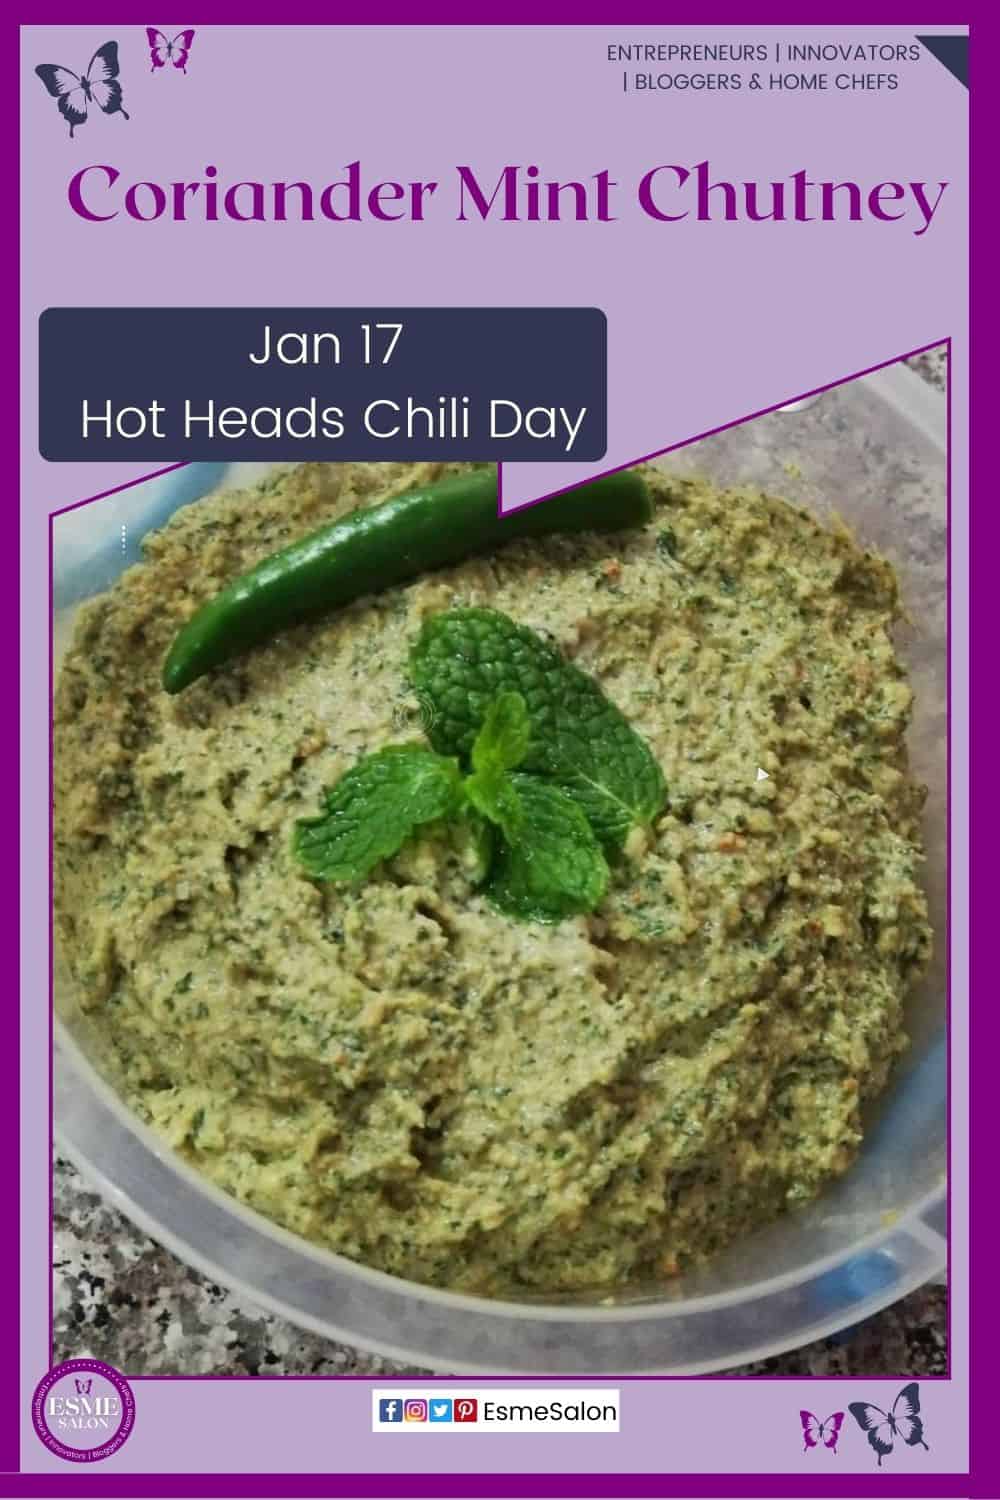 an image of a plastic container filled with Coriander Mint Chutney with a green chili on top